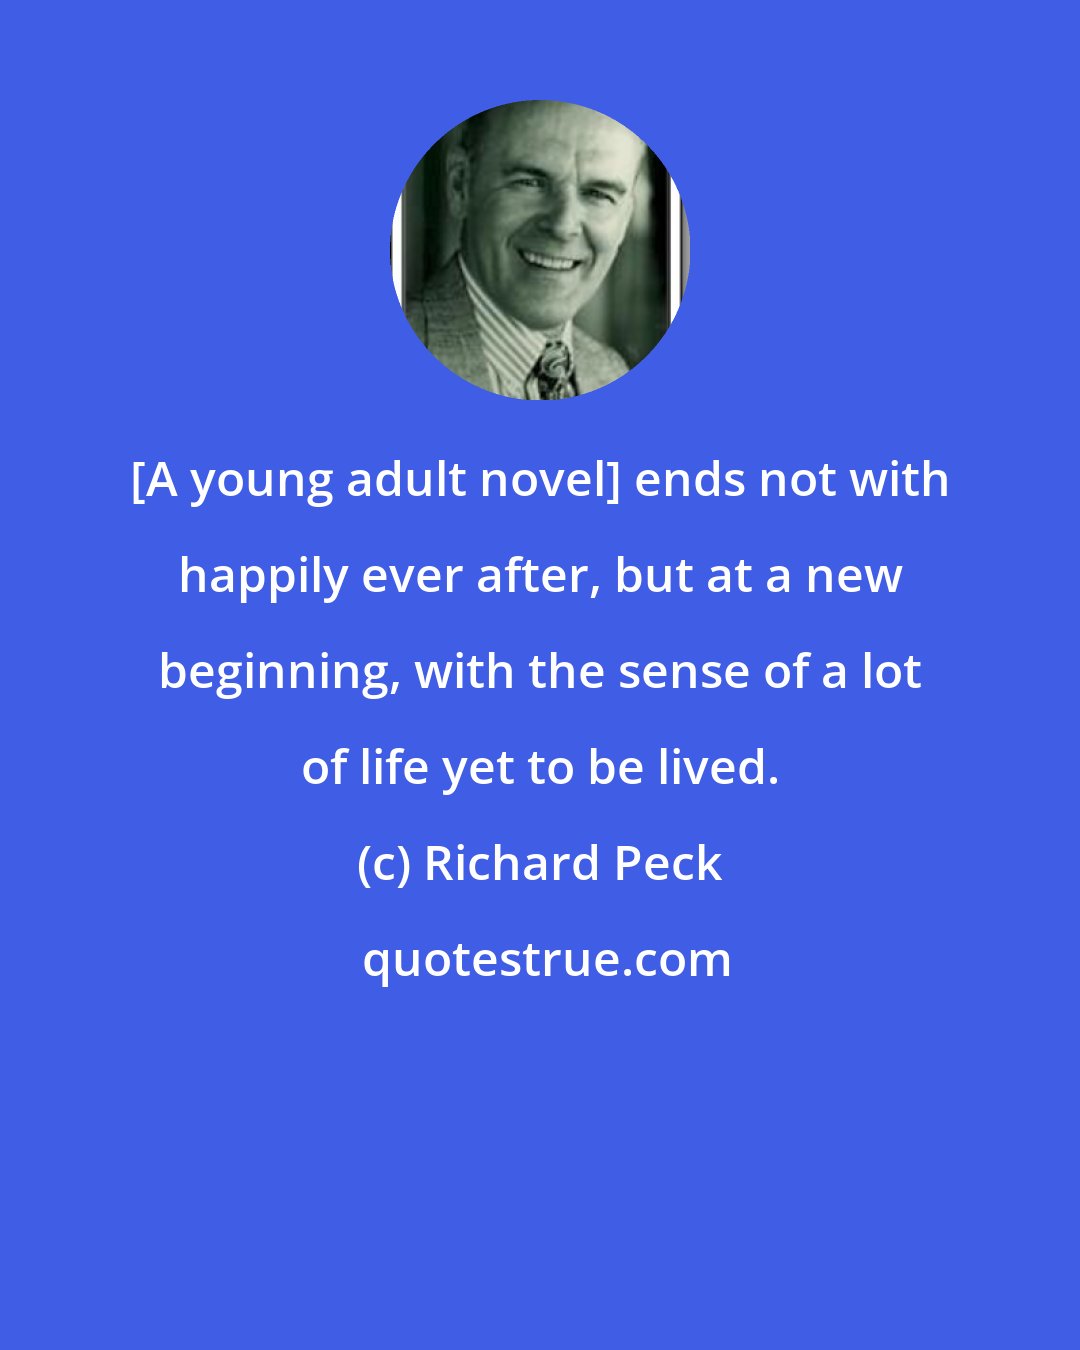 Richard Peck: [A young adult novel] ends not with happily ever after, but at a new beginning, with the sense of a lot of life yet to be lived.